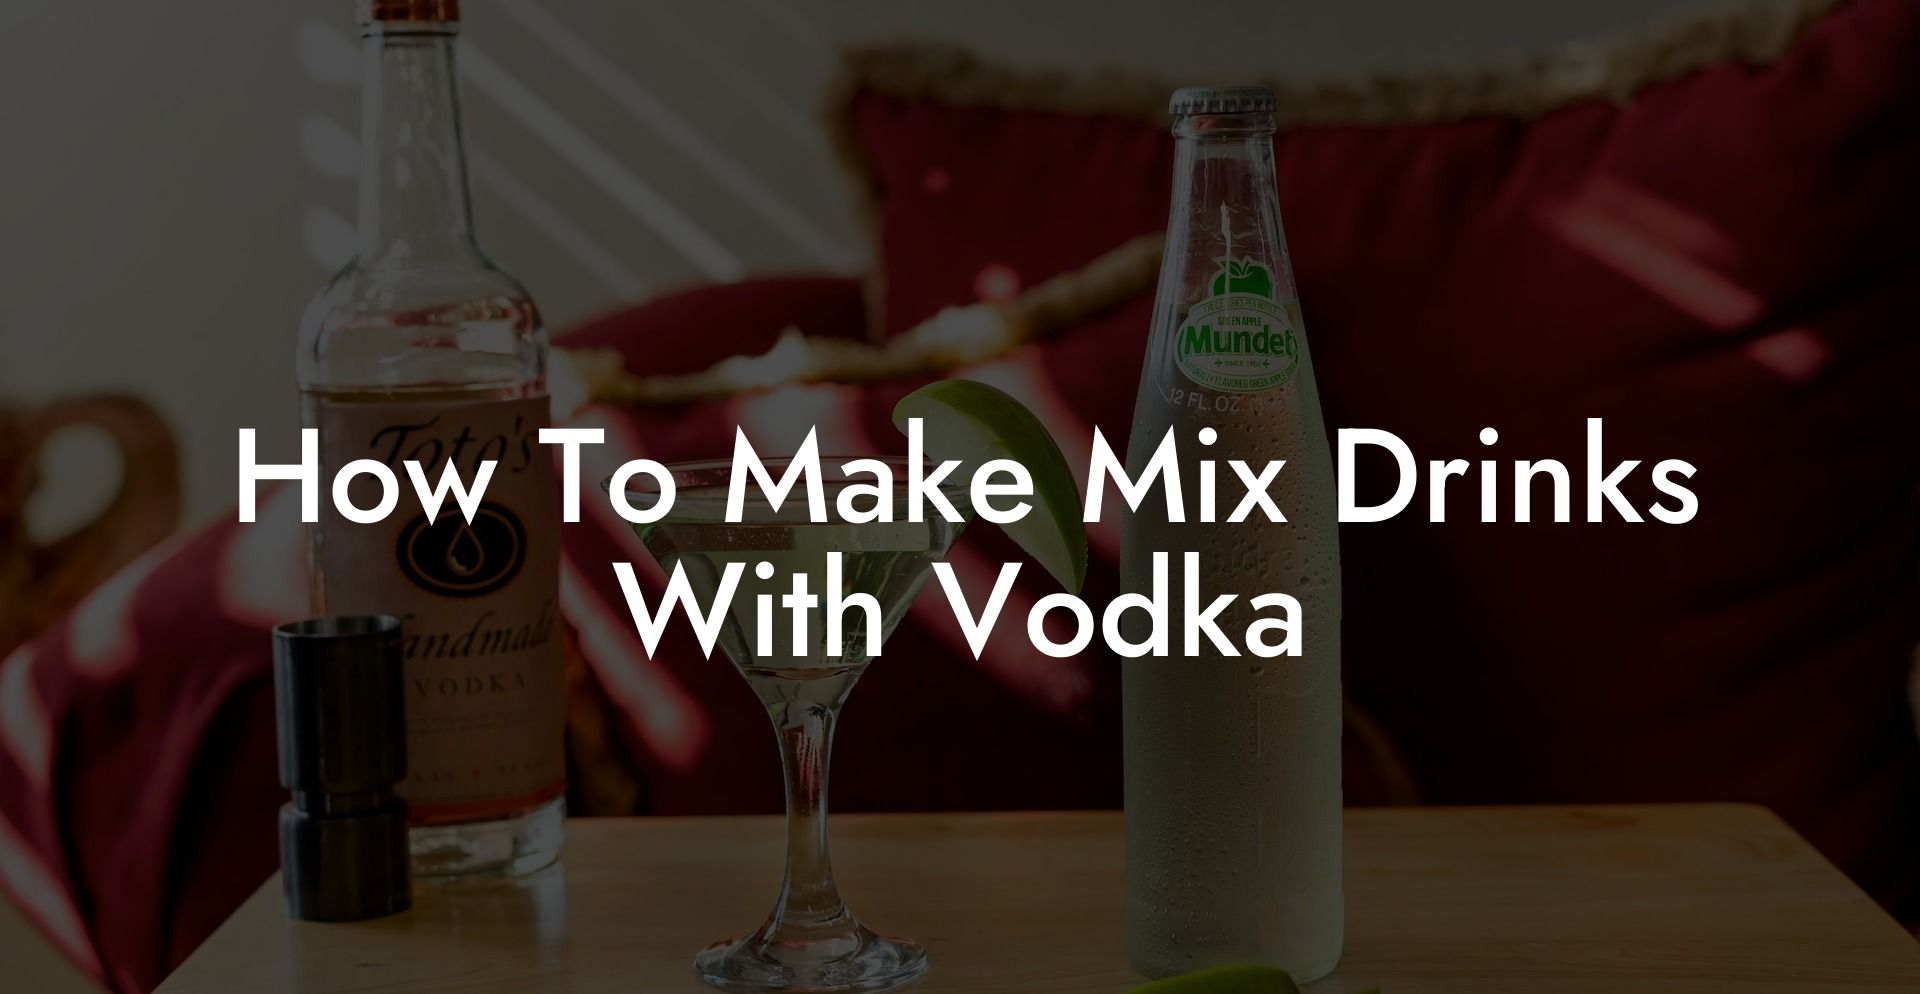 How To Make Mix Drinks With Vodka